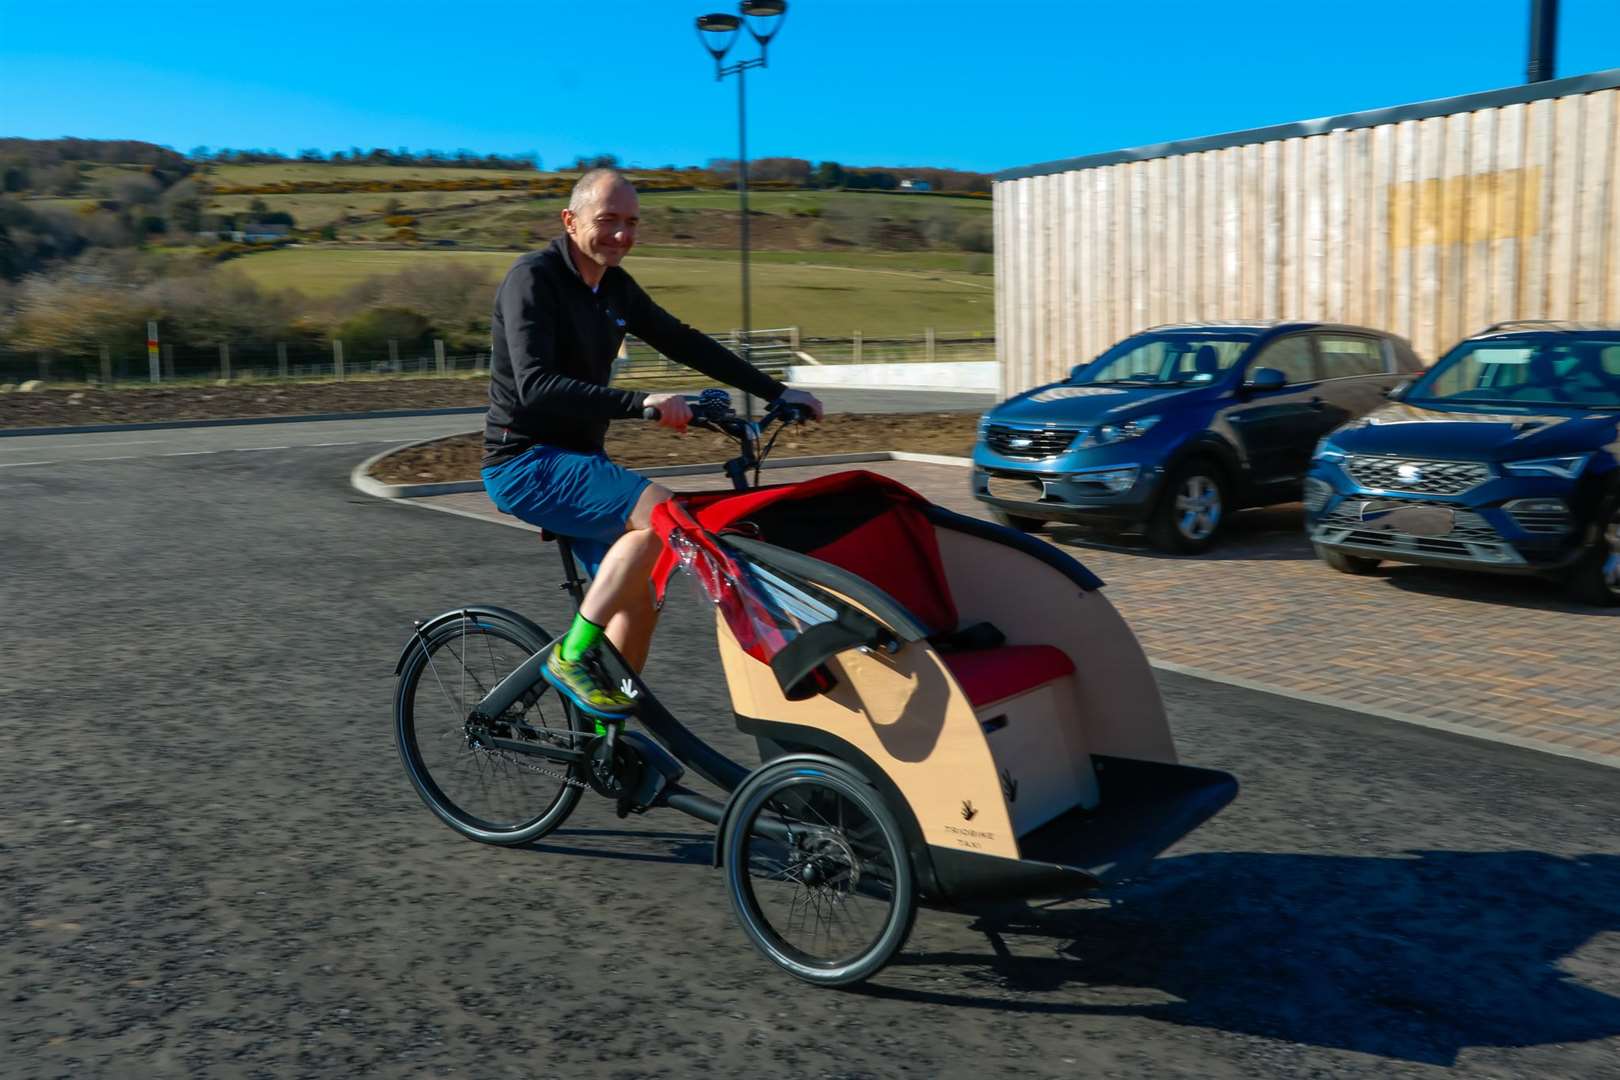 Alan McCaffrey, Fortrose & Rosemarkie chapter captain with Cycling Without Age Scotland, gives a trishaw demo